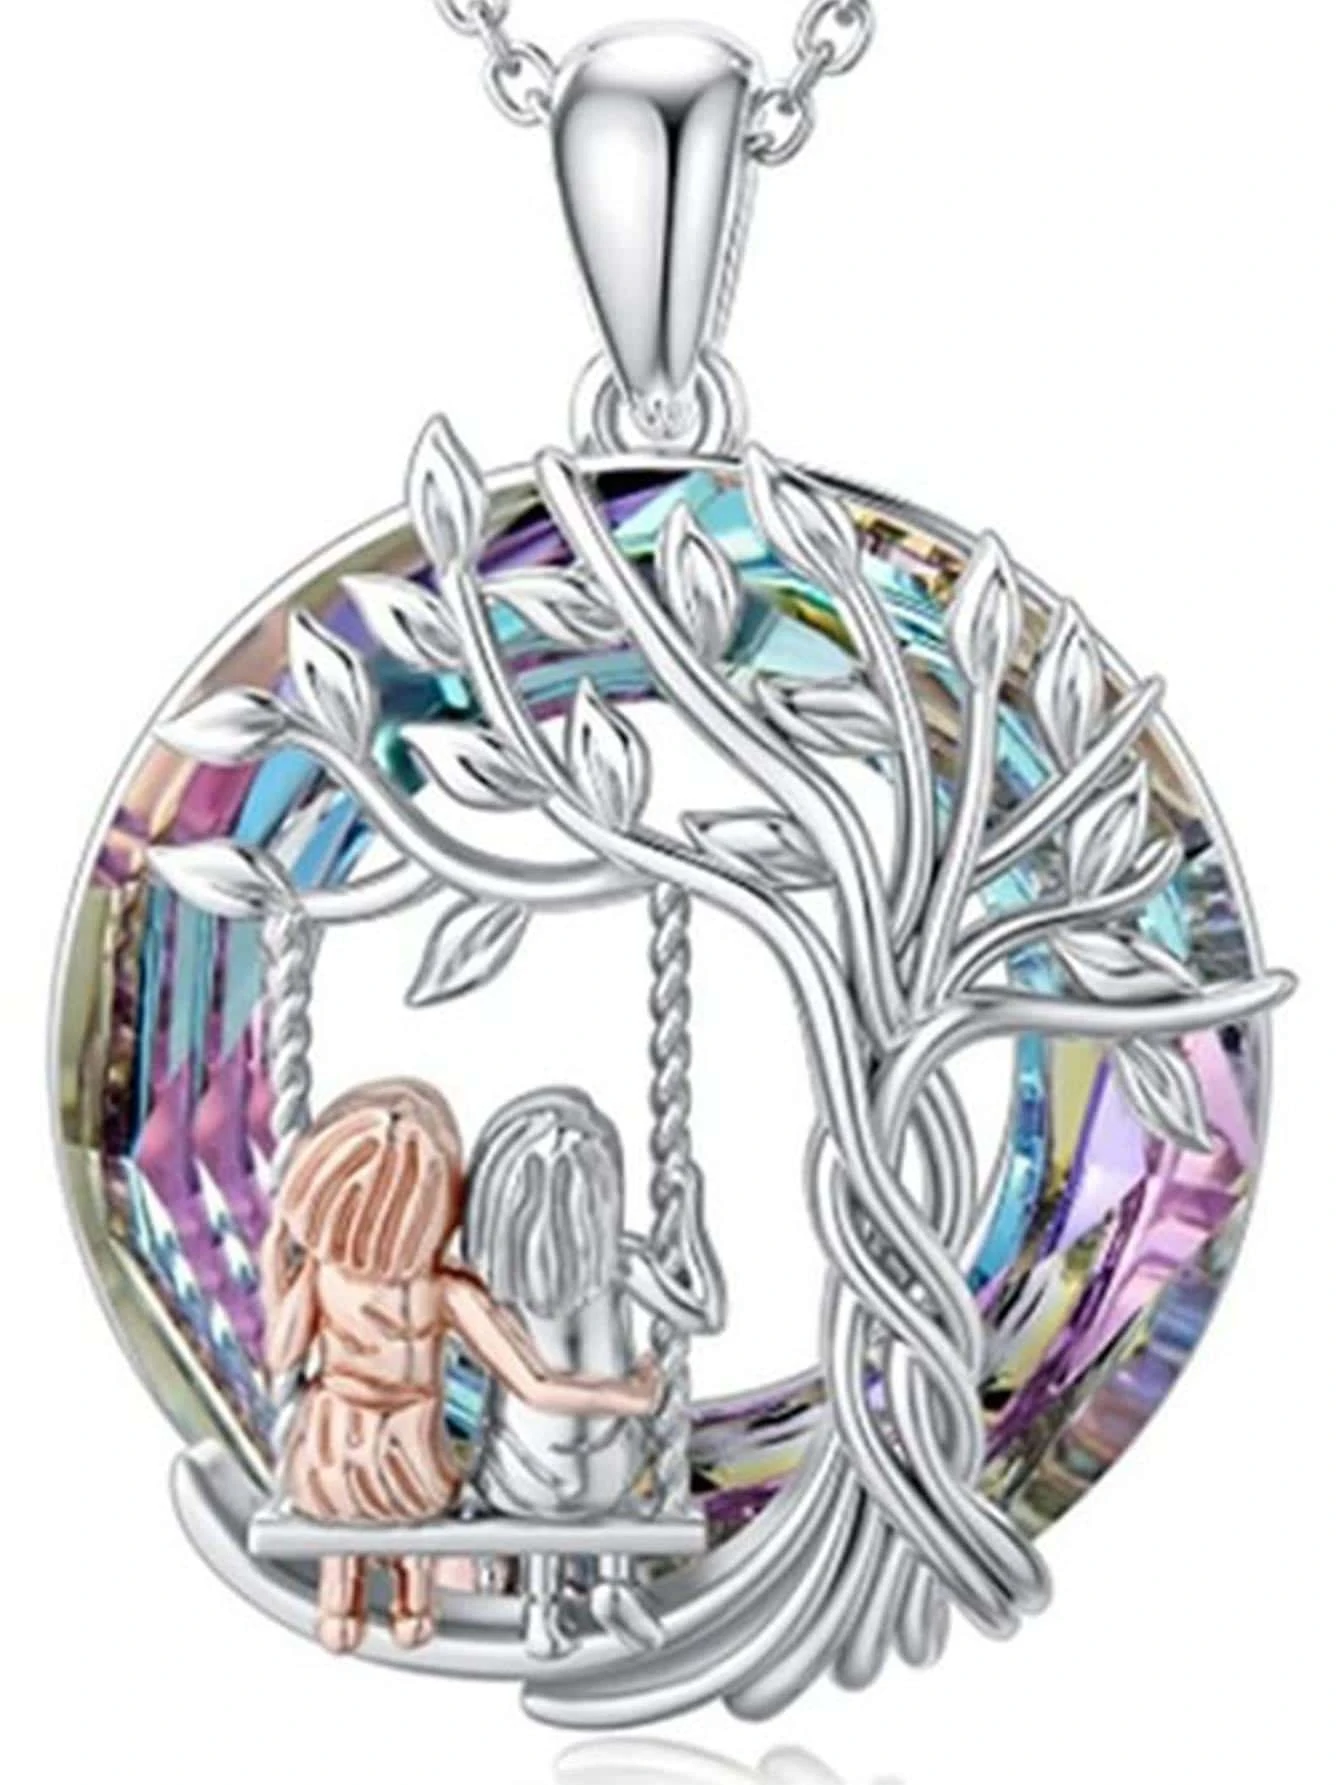 1pc Casual, Unique Tree Of Life Glass Rainbow Pendant Necklace For Sisters, Friends And Parent-child Gift